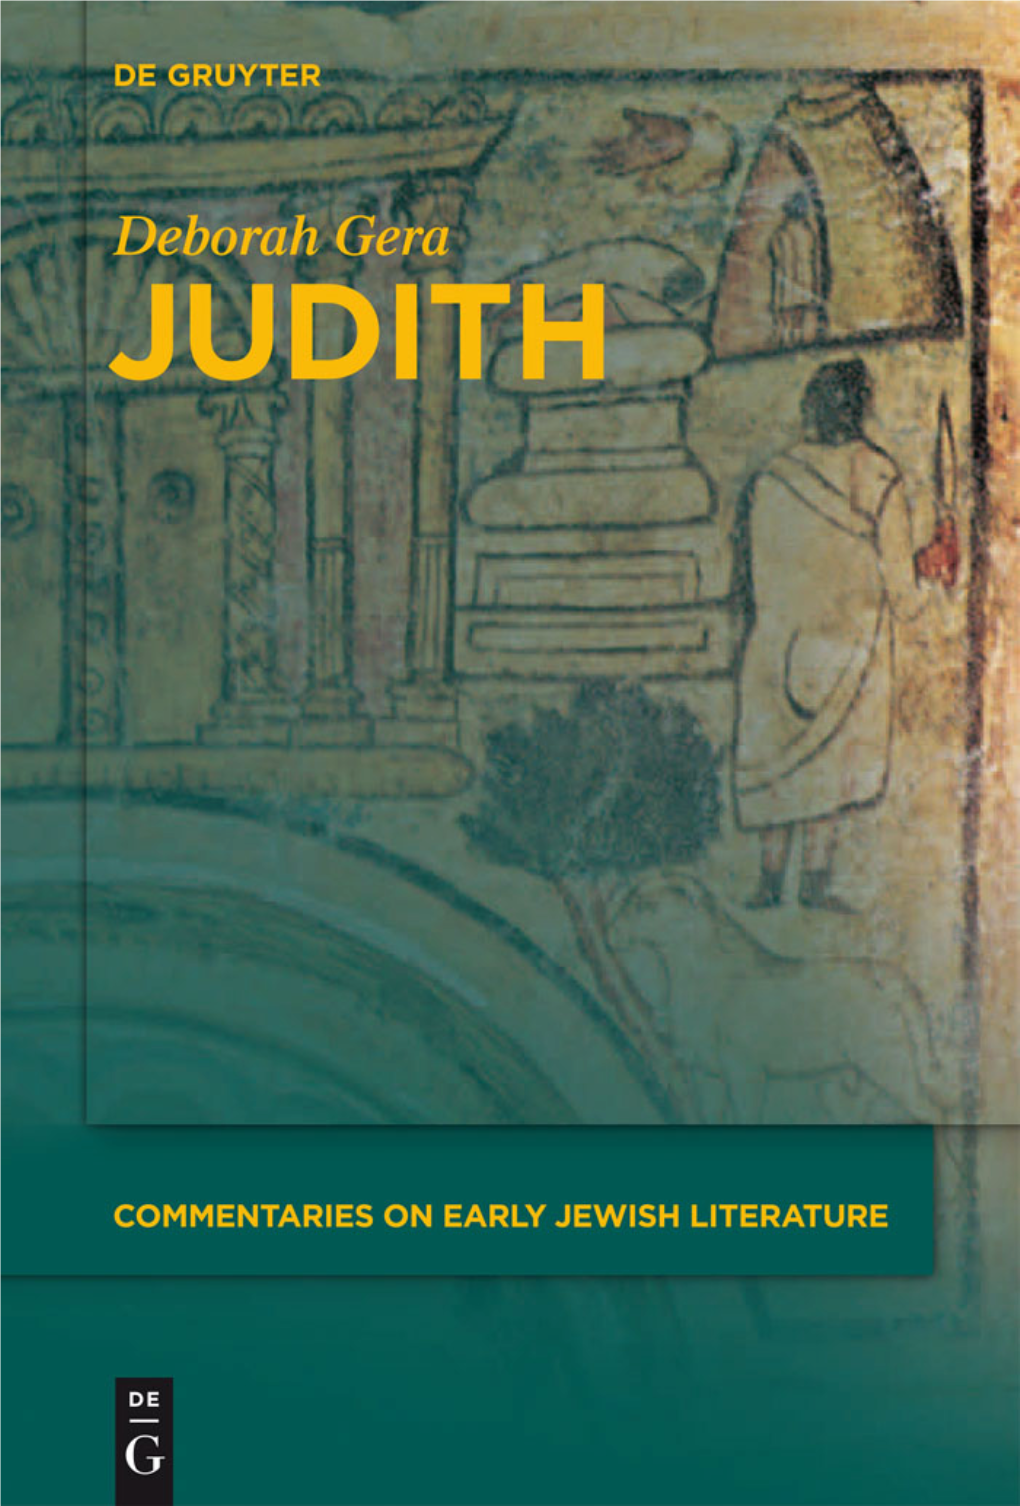 Commentaries on Early Jewish Literature (CEJL)